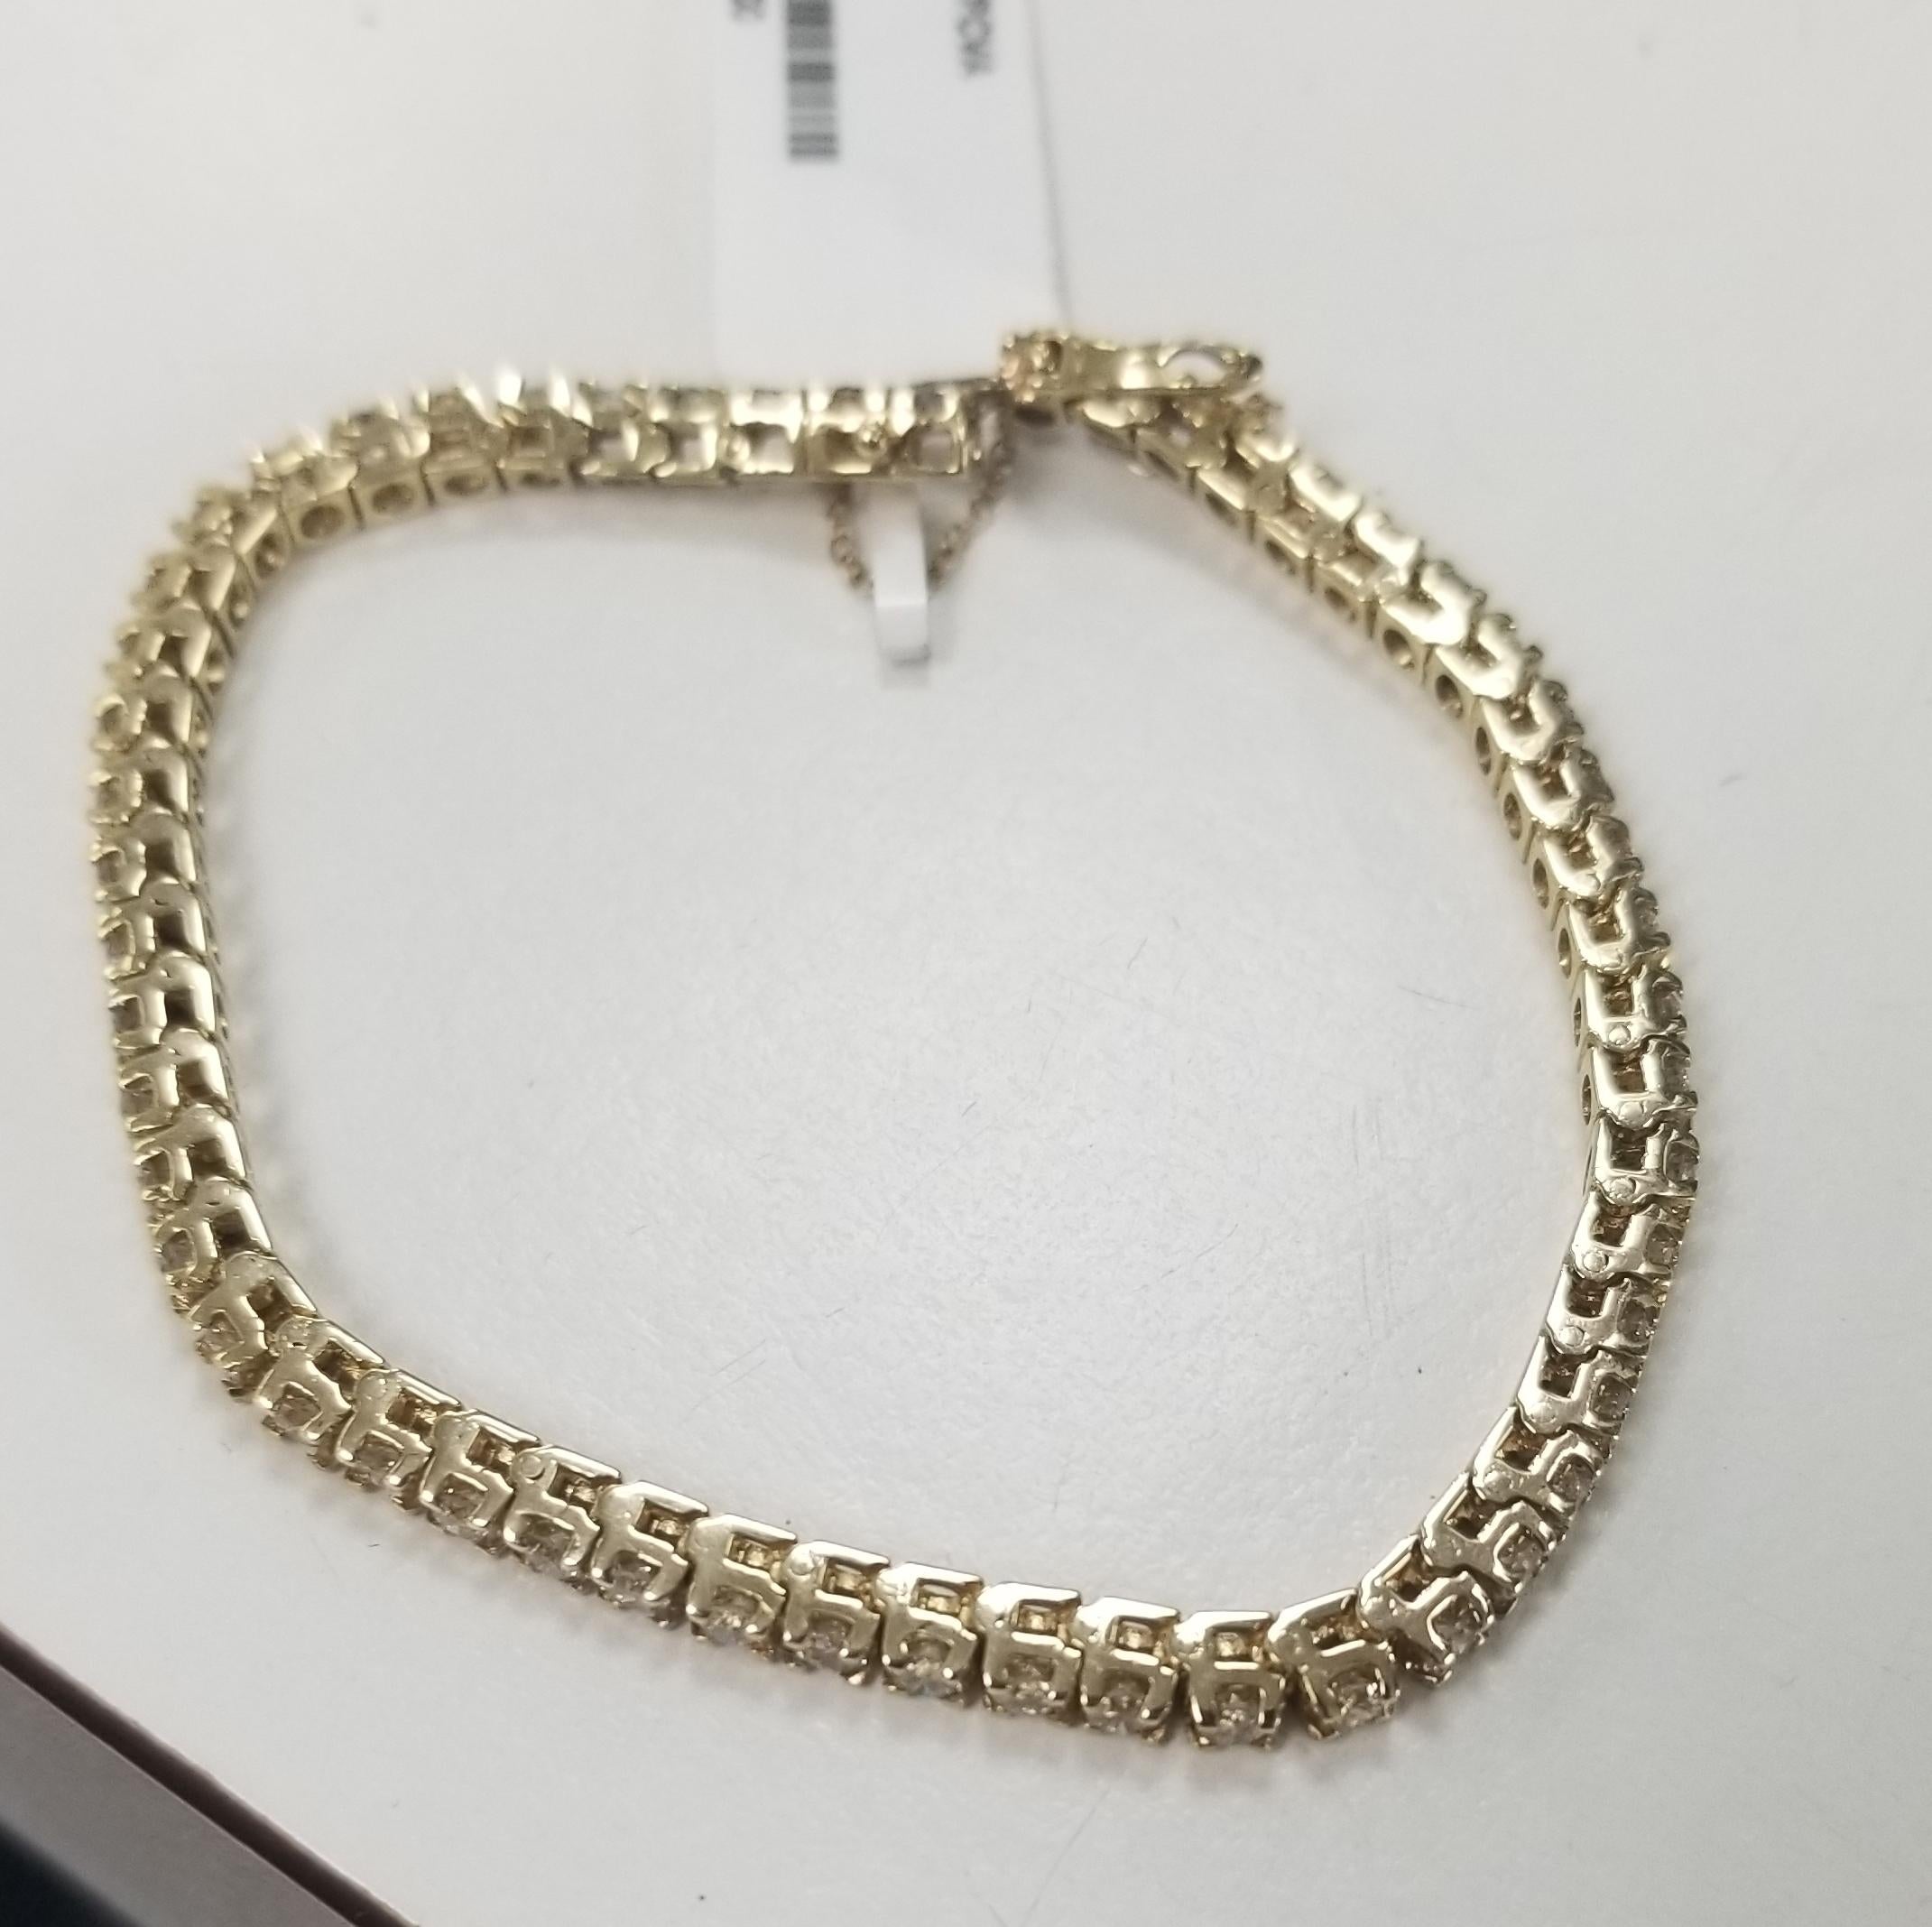 This is very beautiful 14k yellow gold custom made tennis bracelet with 54 round diamonds color G-H and clarity SI1 weighing 3.24cts.
Specifications:
    main stone: ROUND DIAMONDS
    diamonds: 54 PCS
    carat total weight: 3.24
    color: G-H
*We